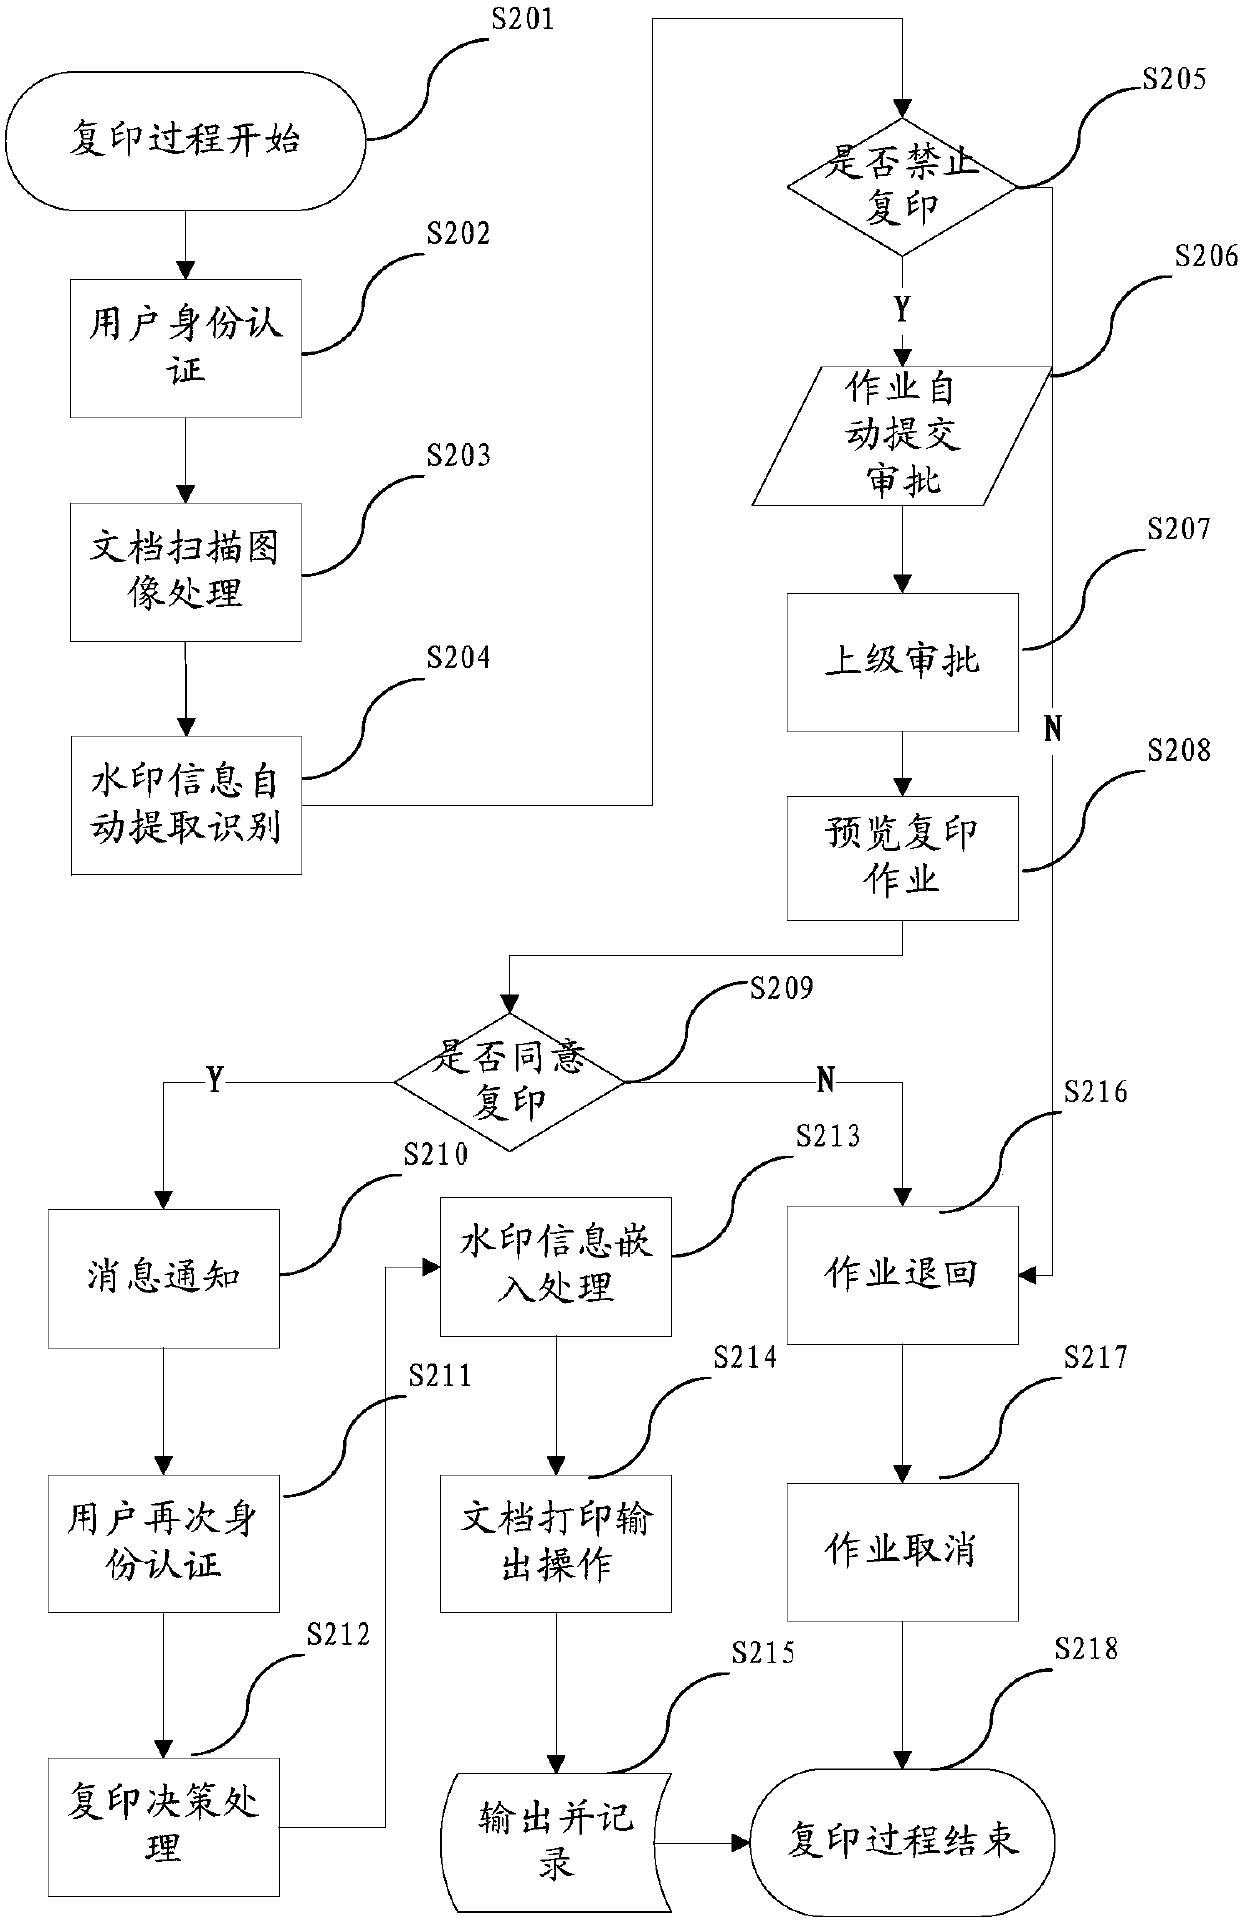 Method and device for safety control and source-tracing tracking of paper document